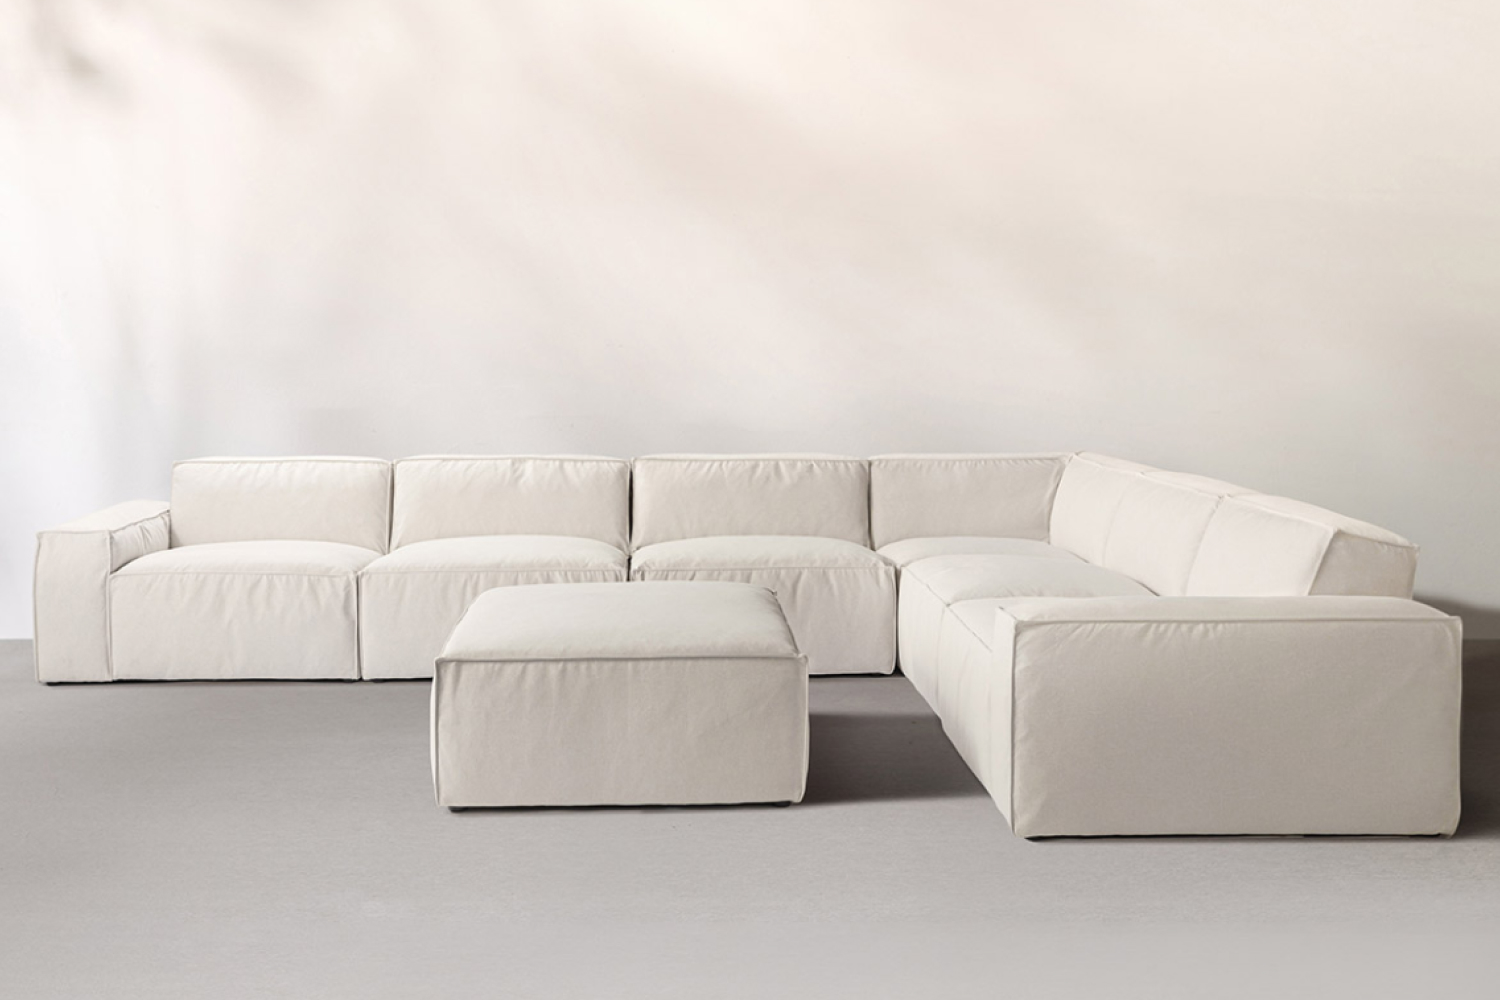 An 'Oasis Modern Low Profile Sofa in Latex' is featured, presenting a sleek and minimalist design.